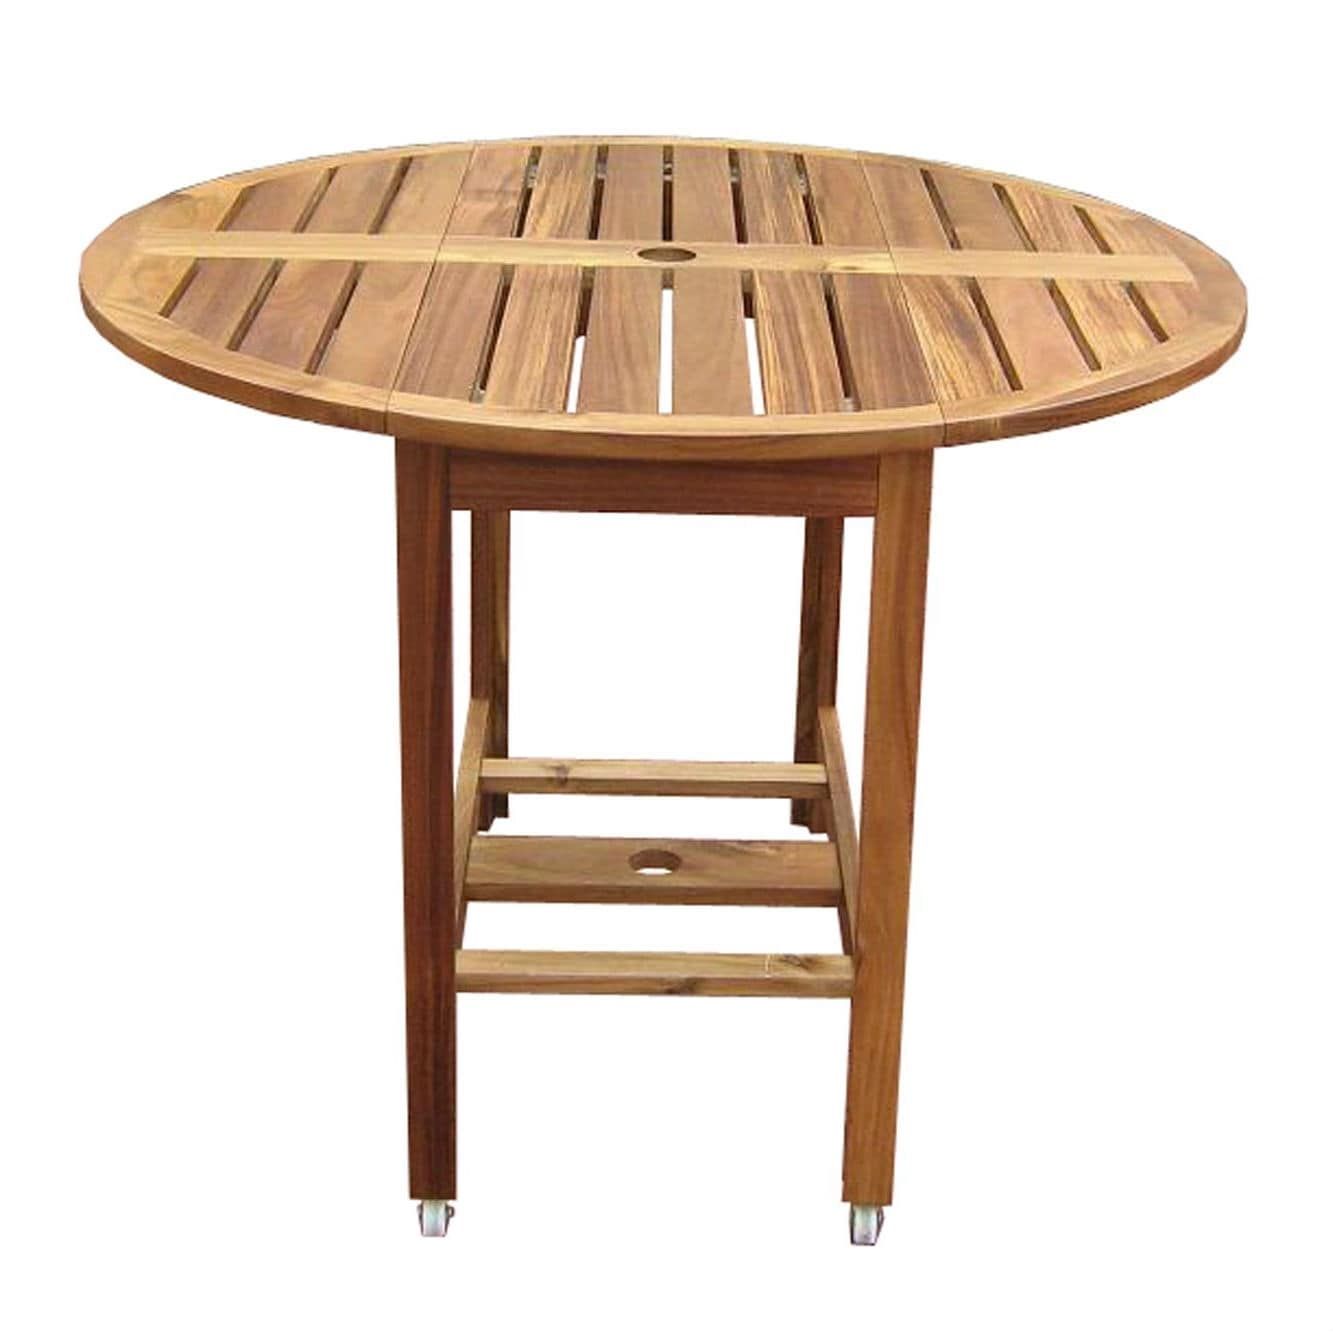 Kiln Dried Hardwood 39 Inch Folding Patio Dining Table Throughout Best And Newest Gorla 39'' Dining Tables (View 8 of 15)